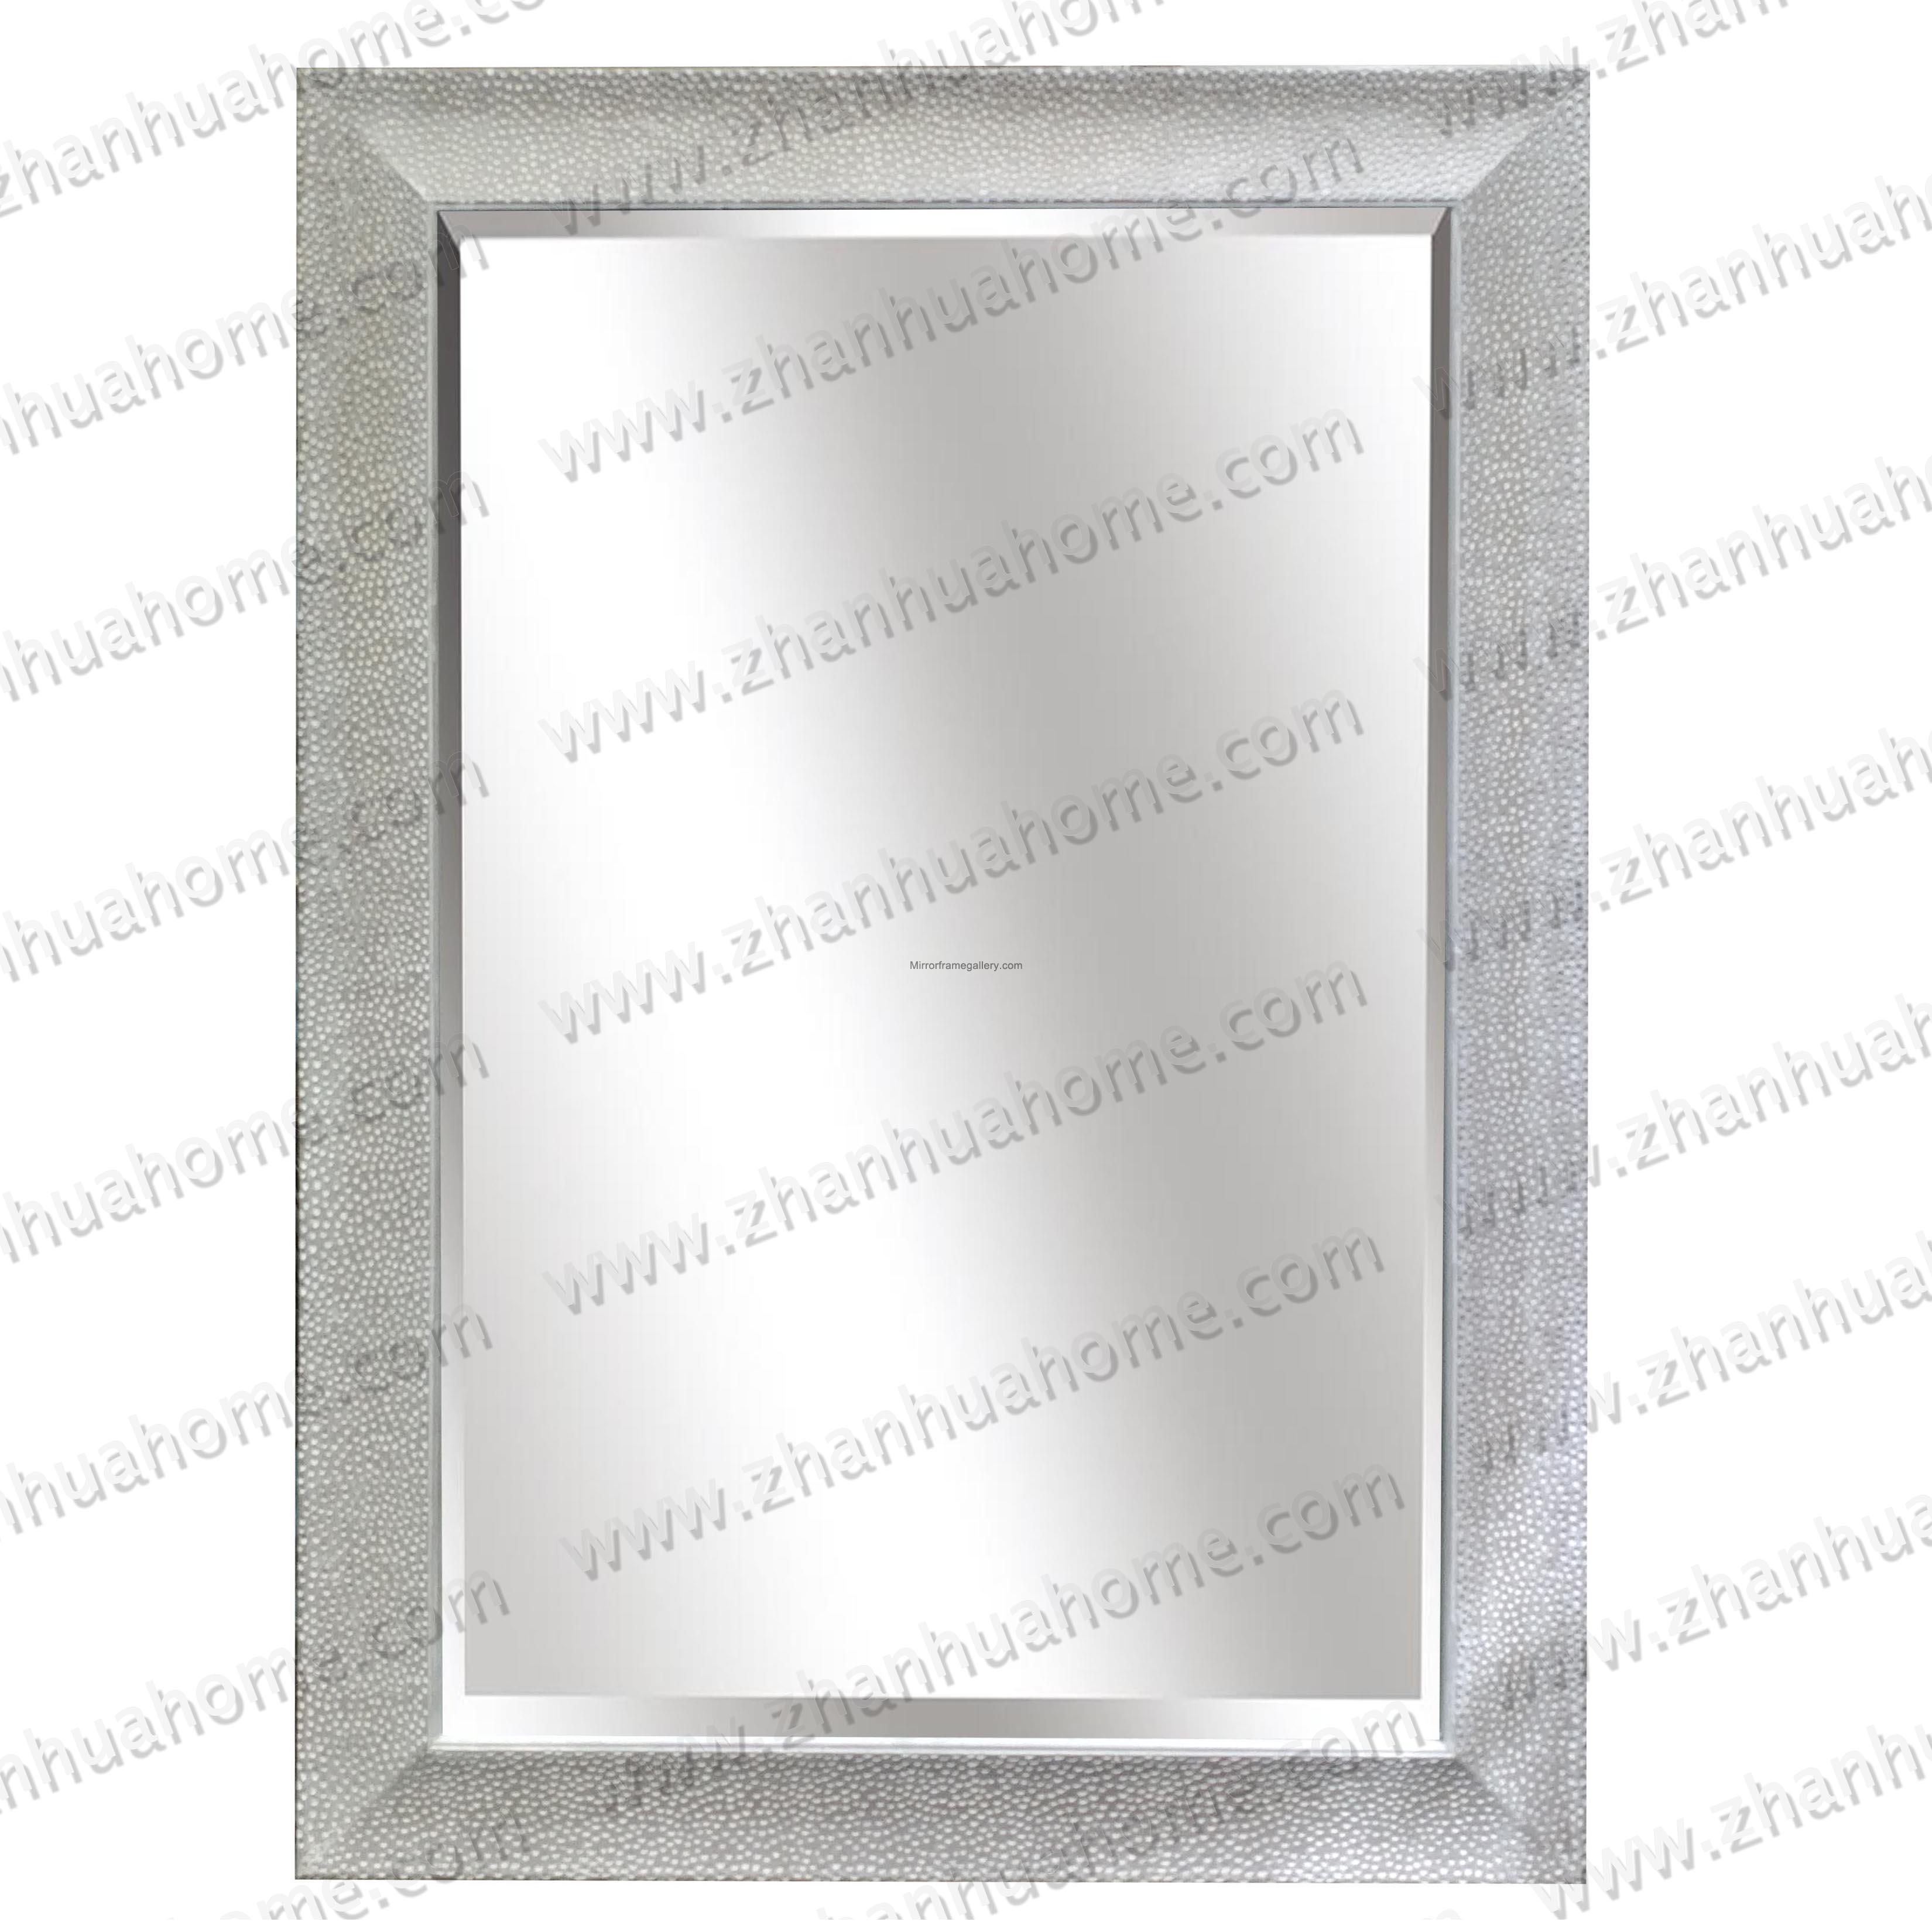 Washed White Wall Mirror Frame